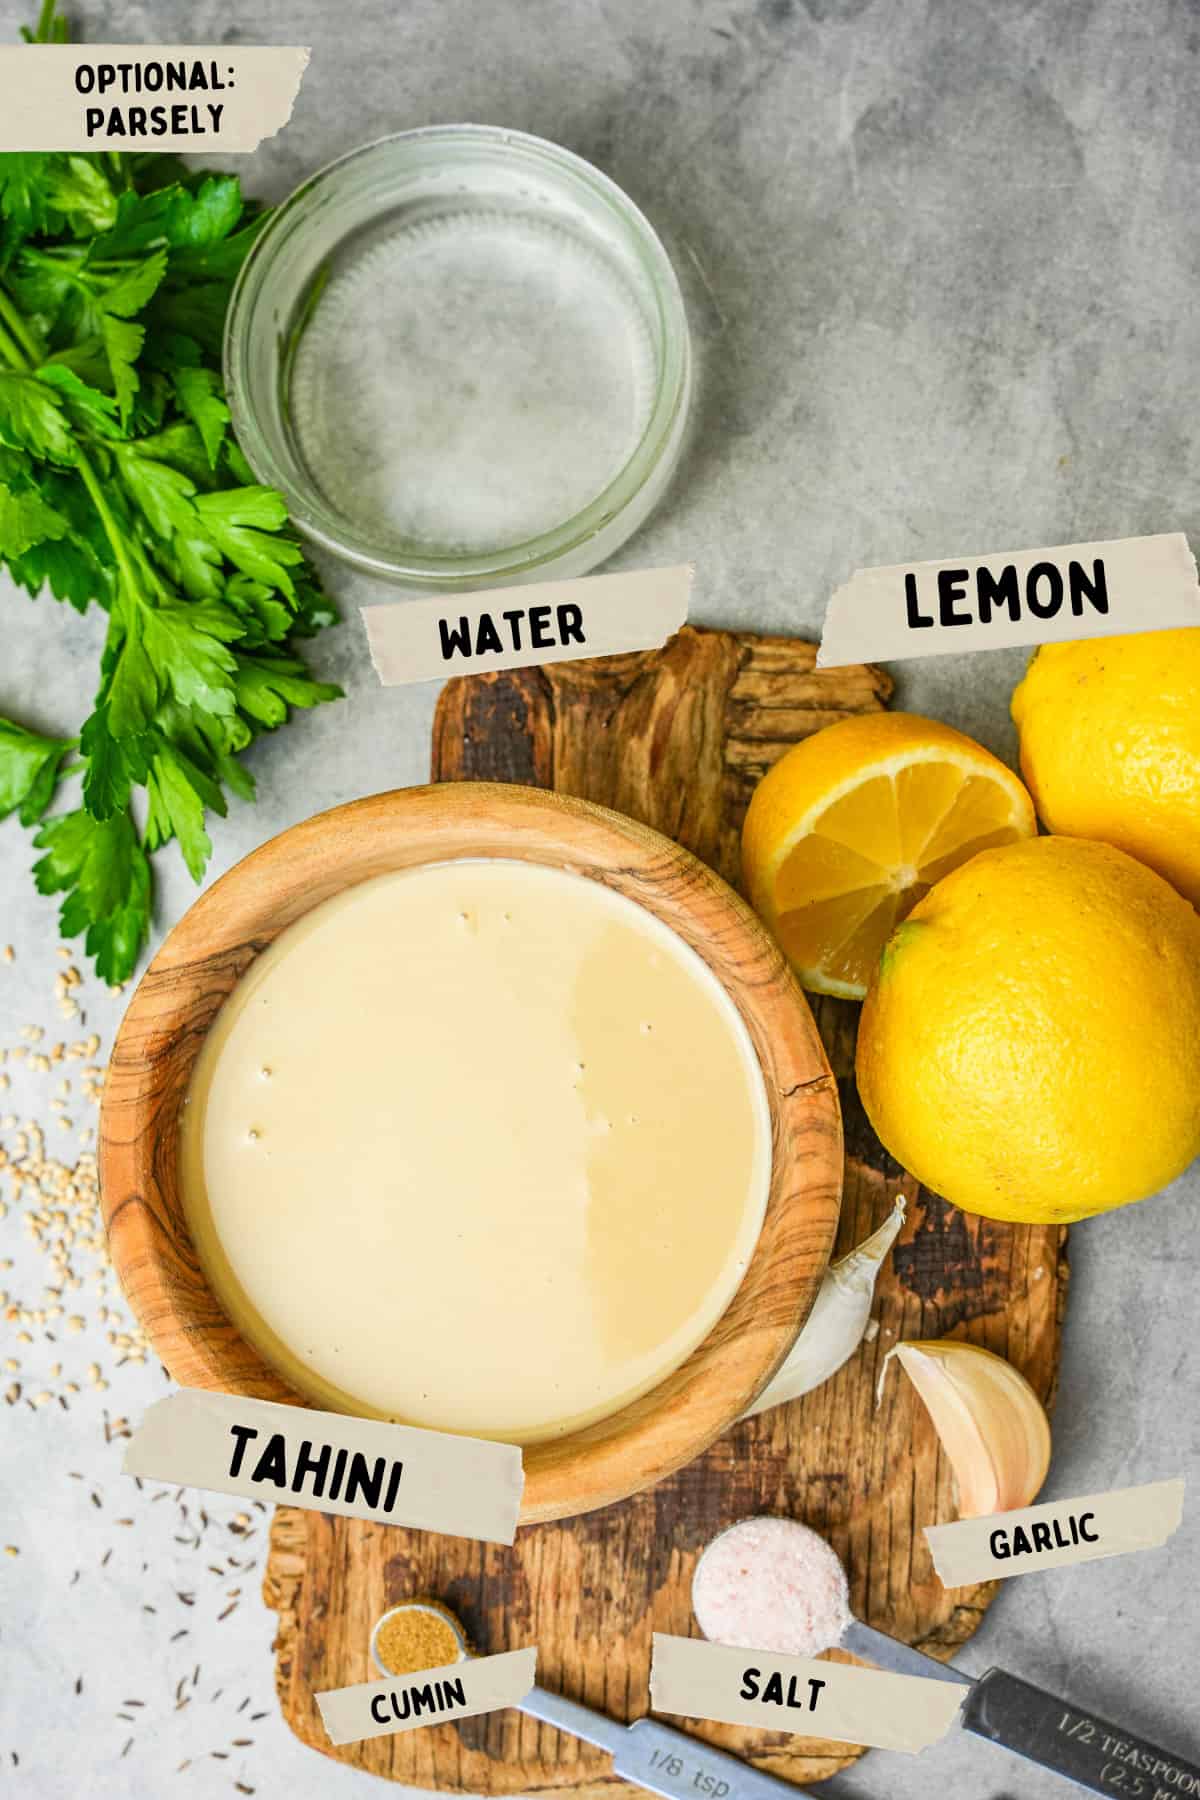 Ingredients for tahini sauce are laid out on a wooden slab on a stone countertop.